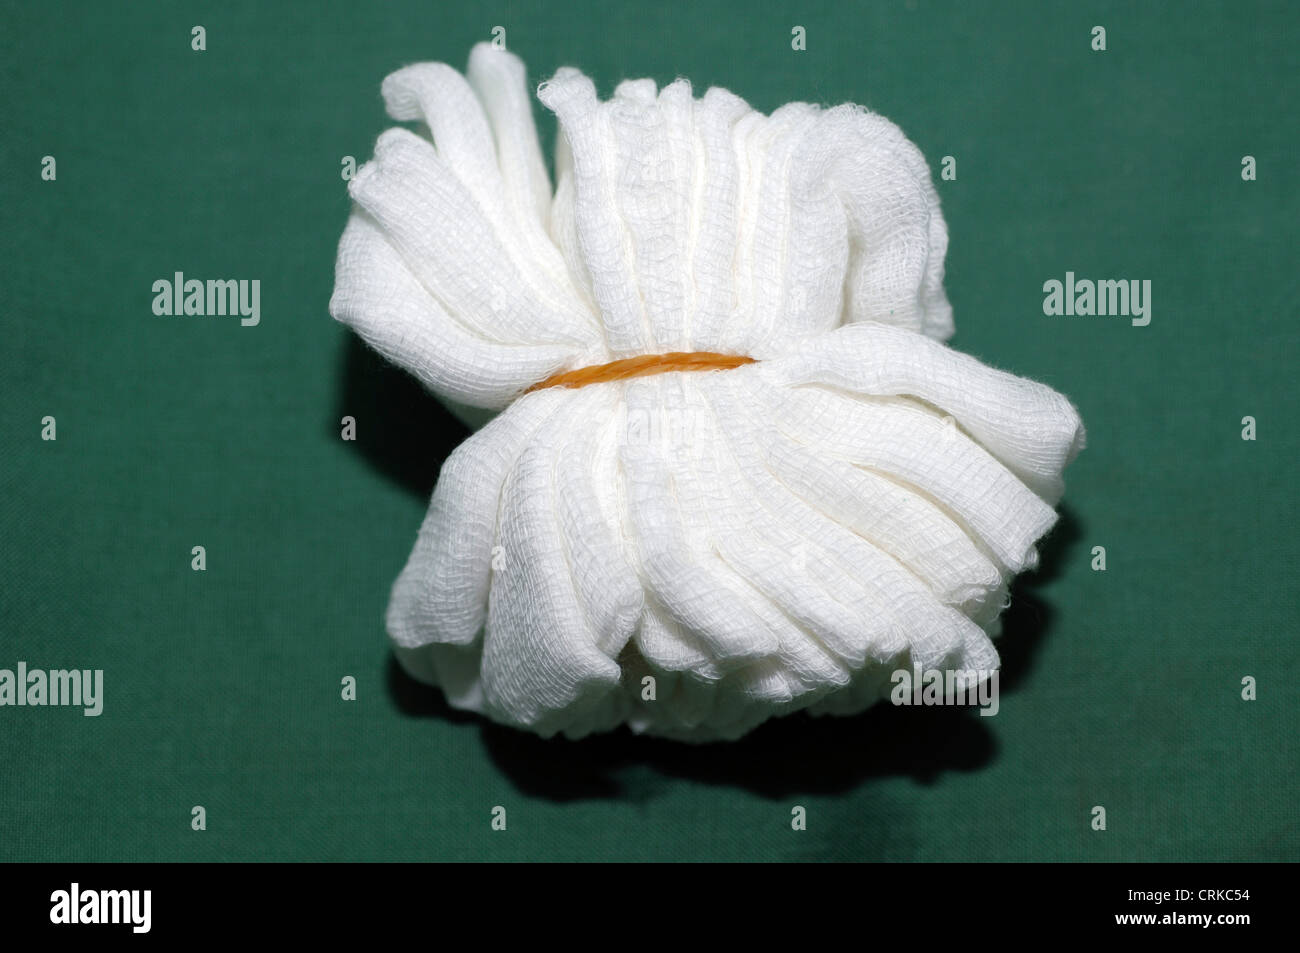 A bundle of white gauze packs that are therapeutically inserted into a body cavity or wound. Stock Photo